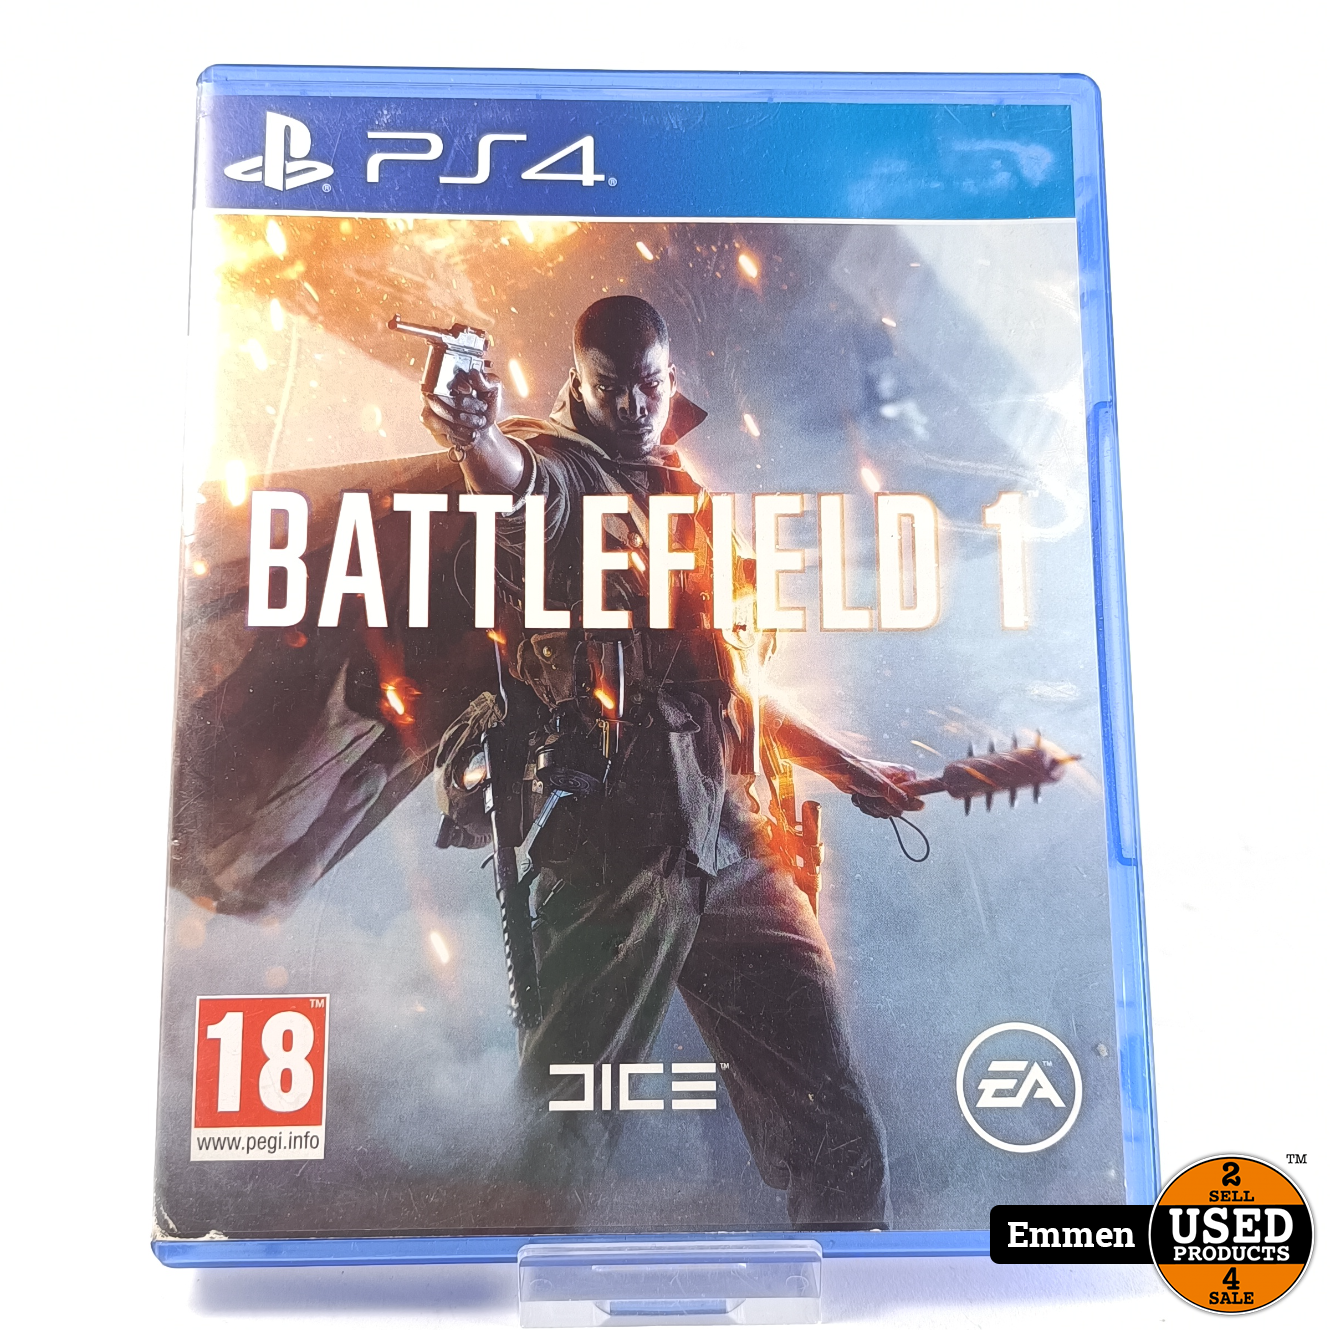 Playstation 4 Game: Battlefield 1 - Used Products